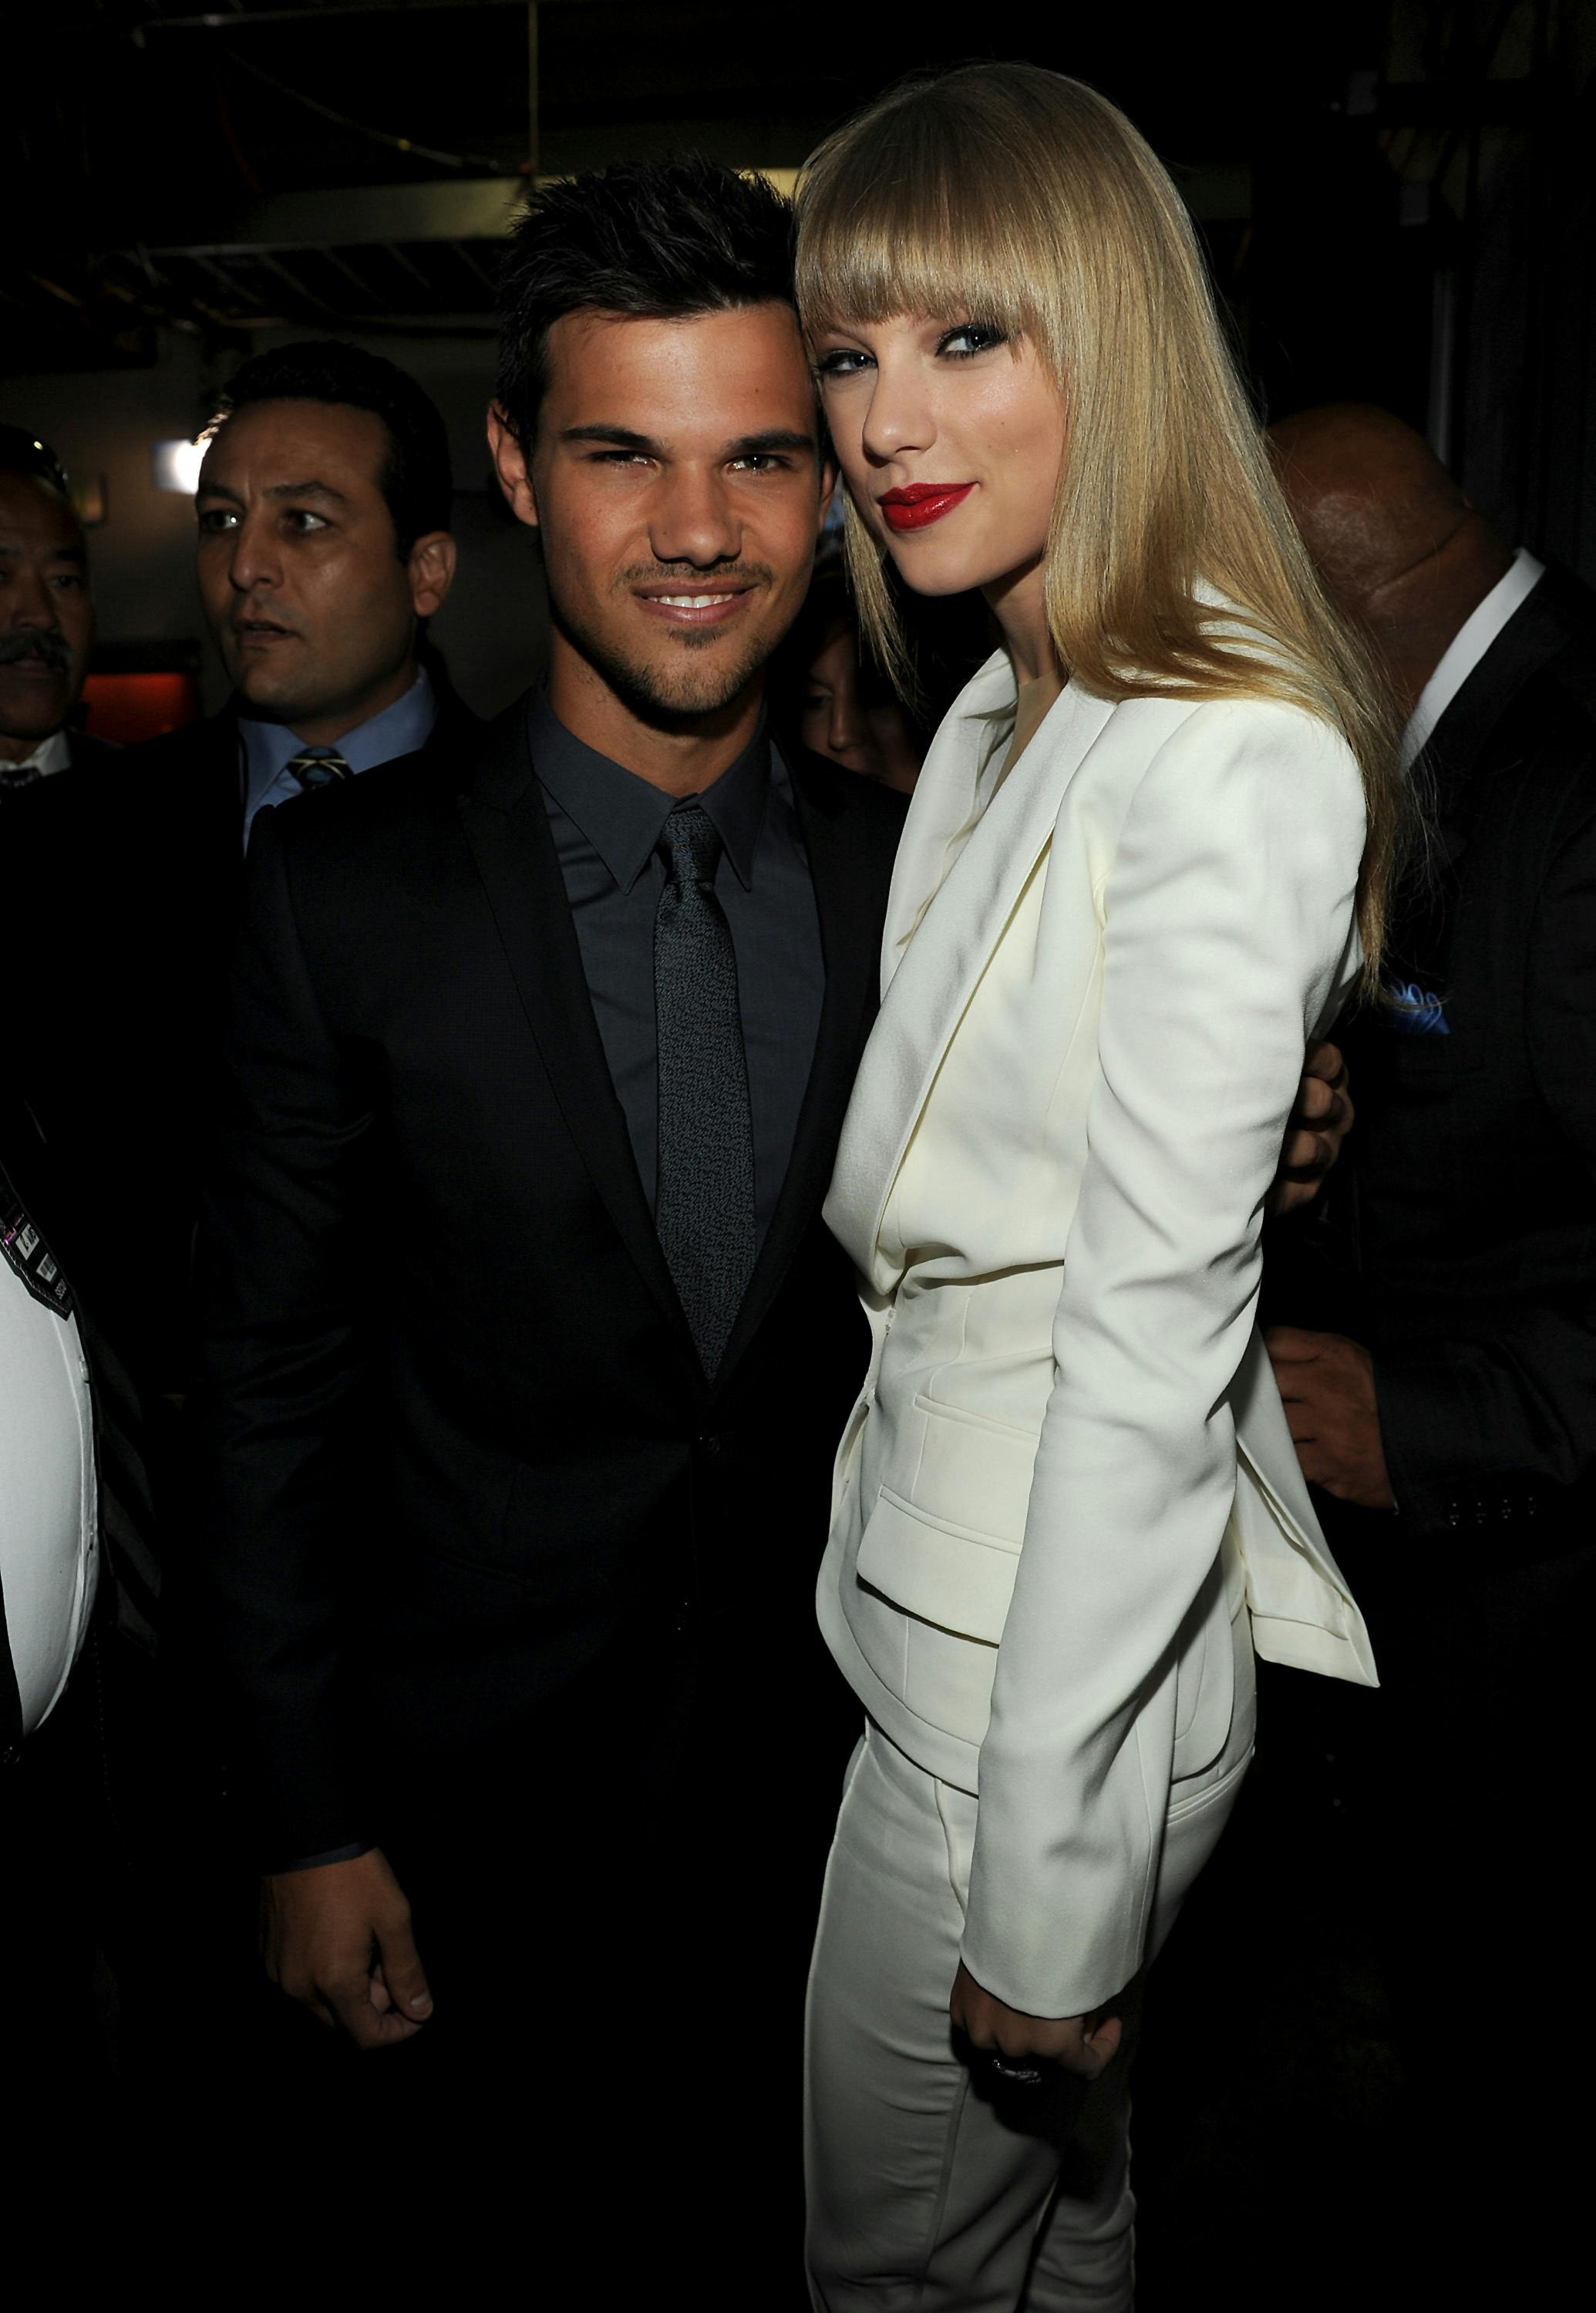 LOS ANGELES, CA - SEPTEMBER 6: (L-R) Taylor Lautner and Taylor Swift backstage at the 2012 MTV Video Music Awards at Staples Center on September 6, 2012 in Los Angeles, California. (Photo by Frank Micelotta/Invsion/AP)